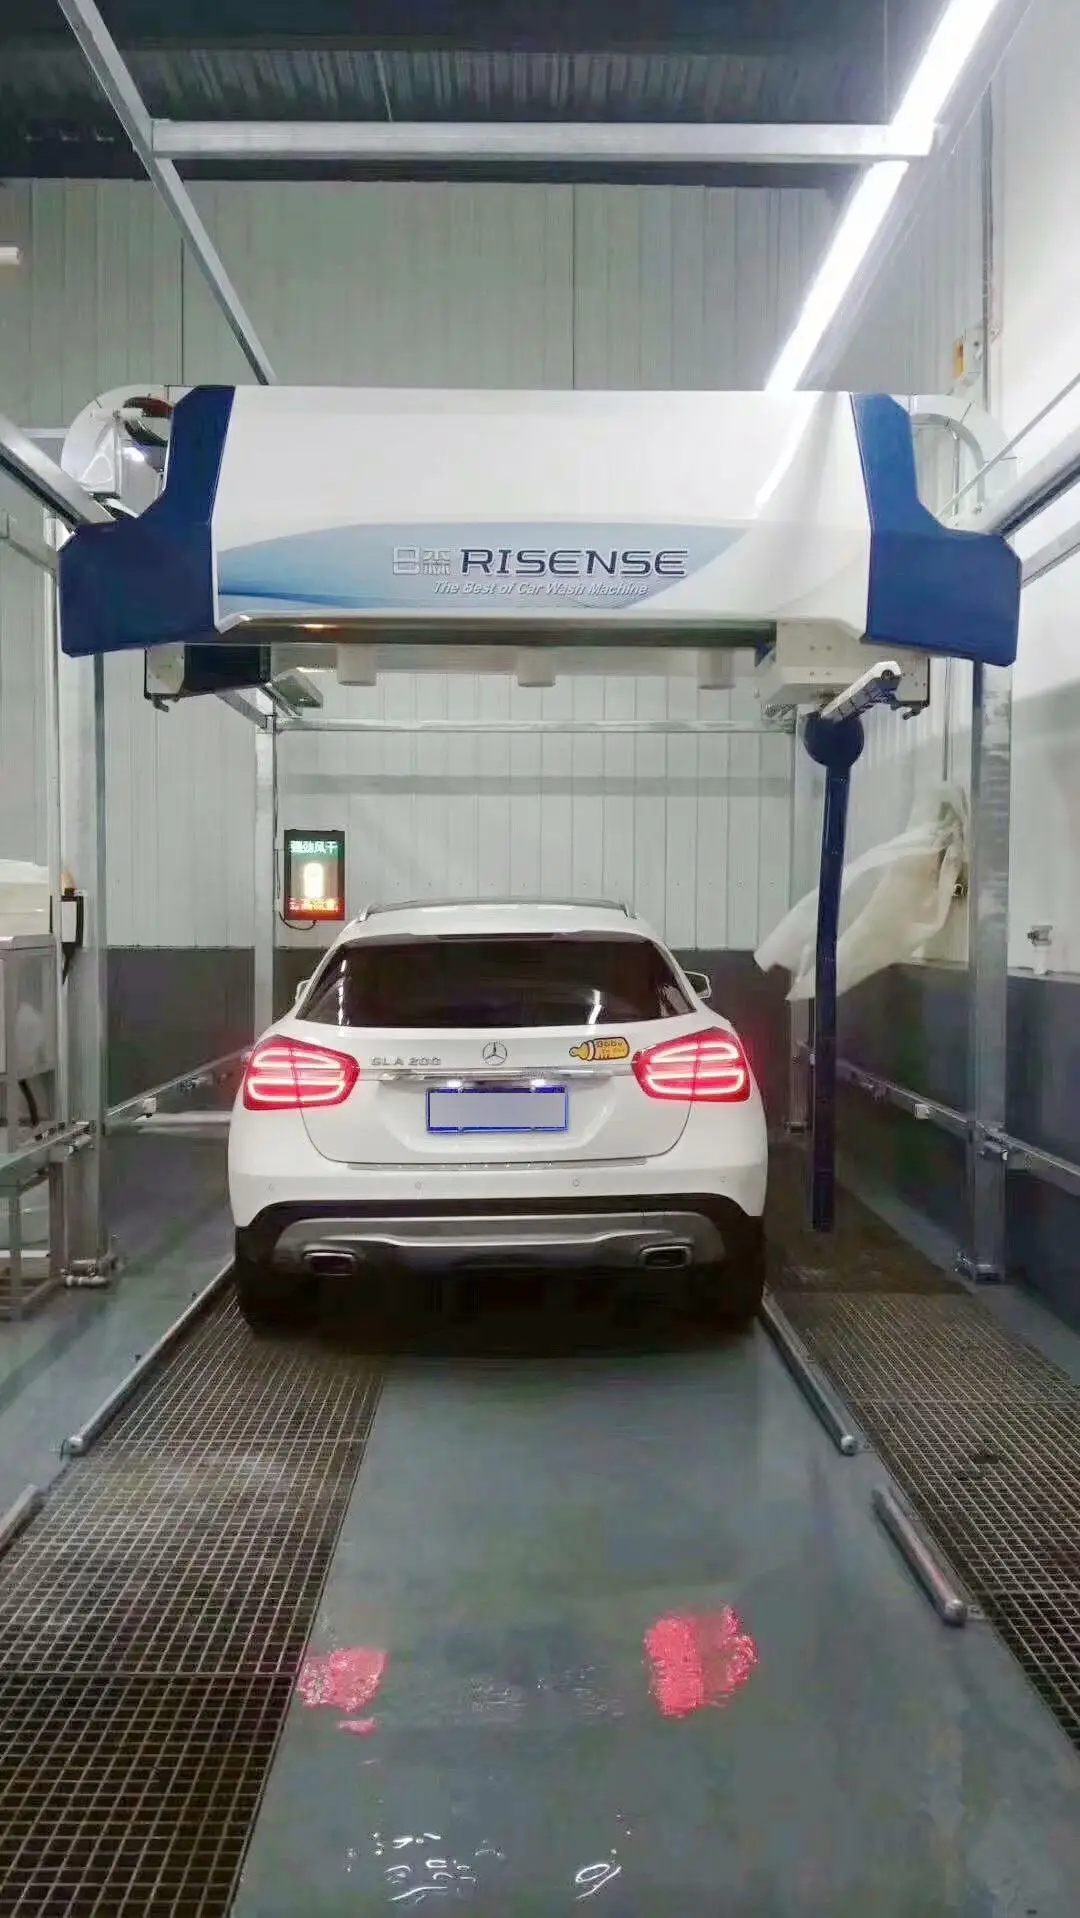 Risense Automatic Disinfecting Touchless Automatic Car Wash Machine System Equipment Station Tunnel